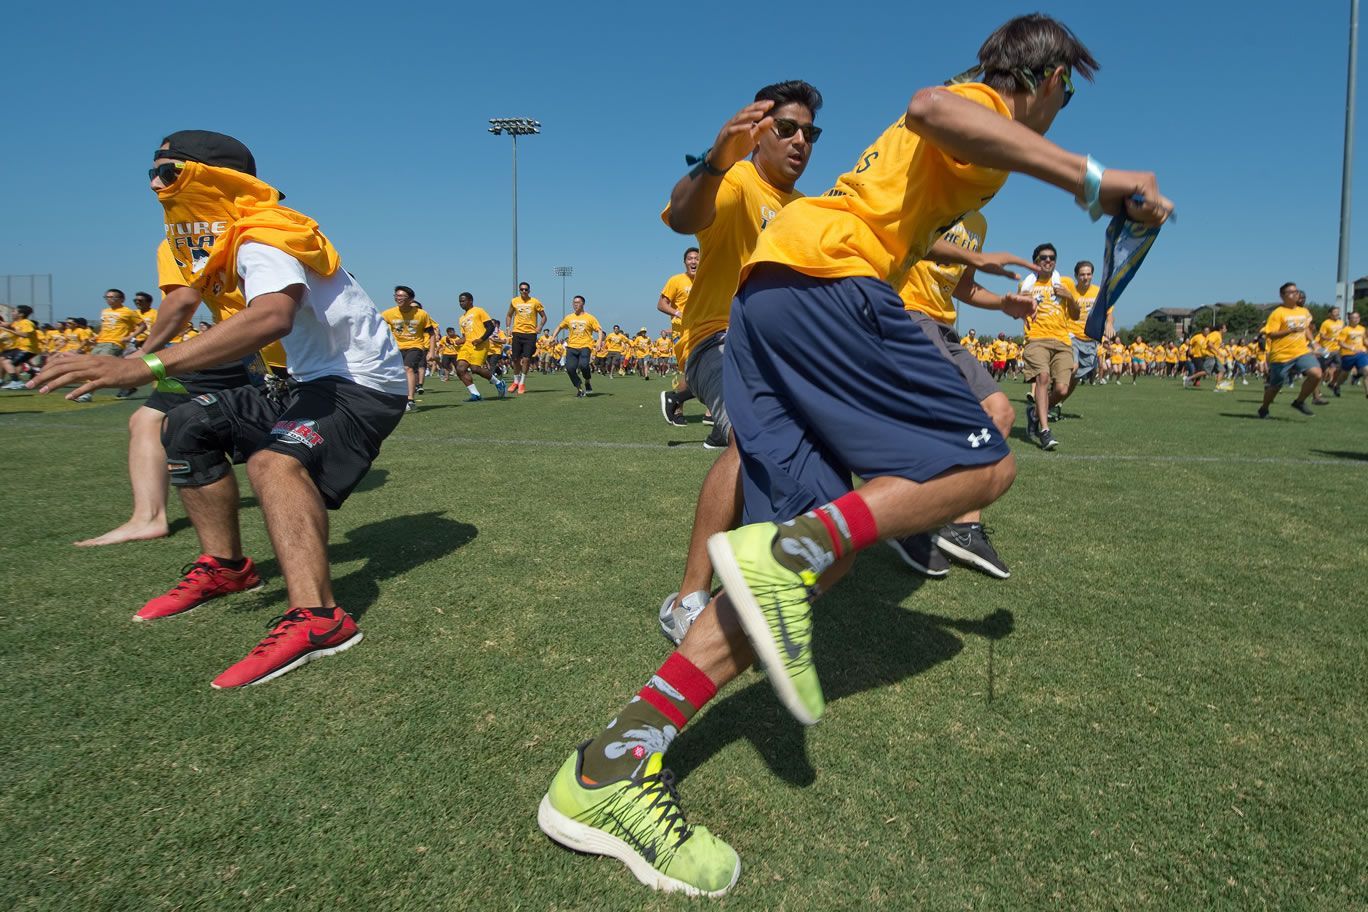 Largest game of capture the flag: UC Irvine breaks Guinness World Records record (VIDEO)
